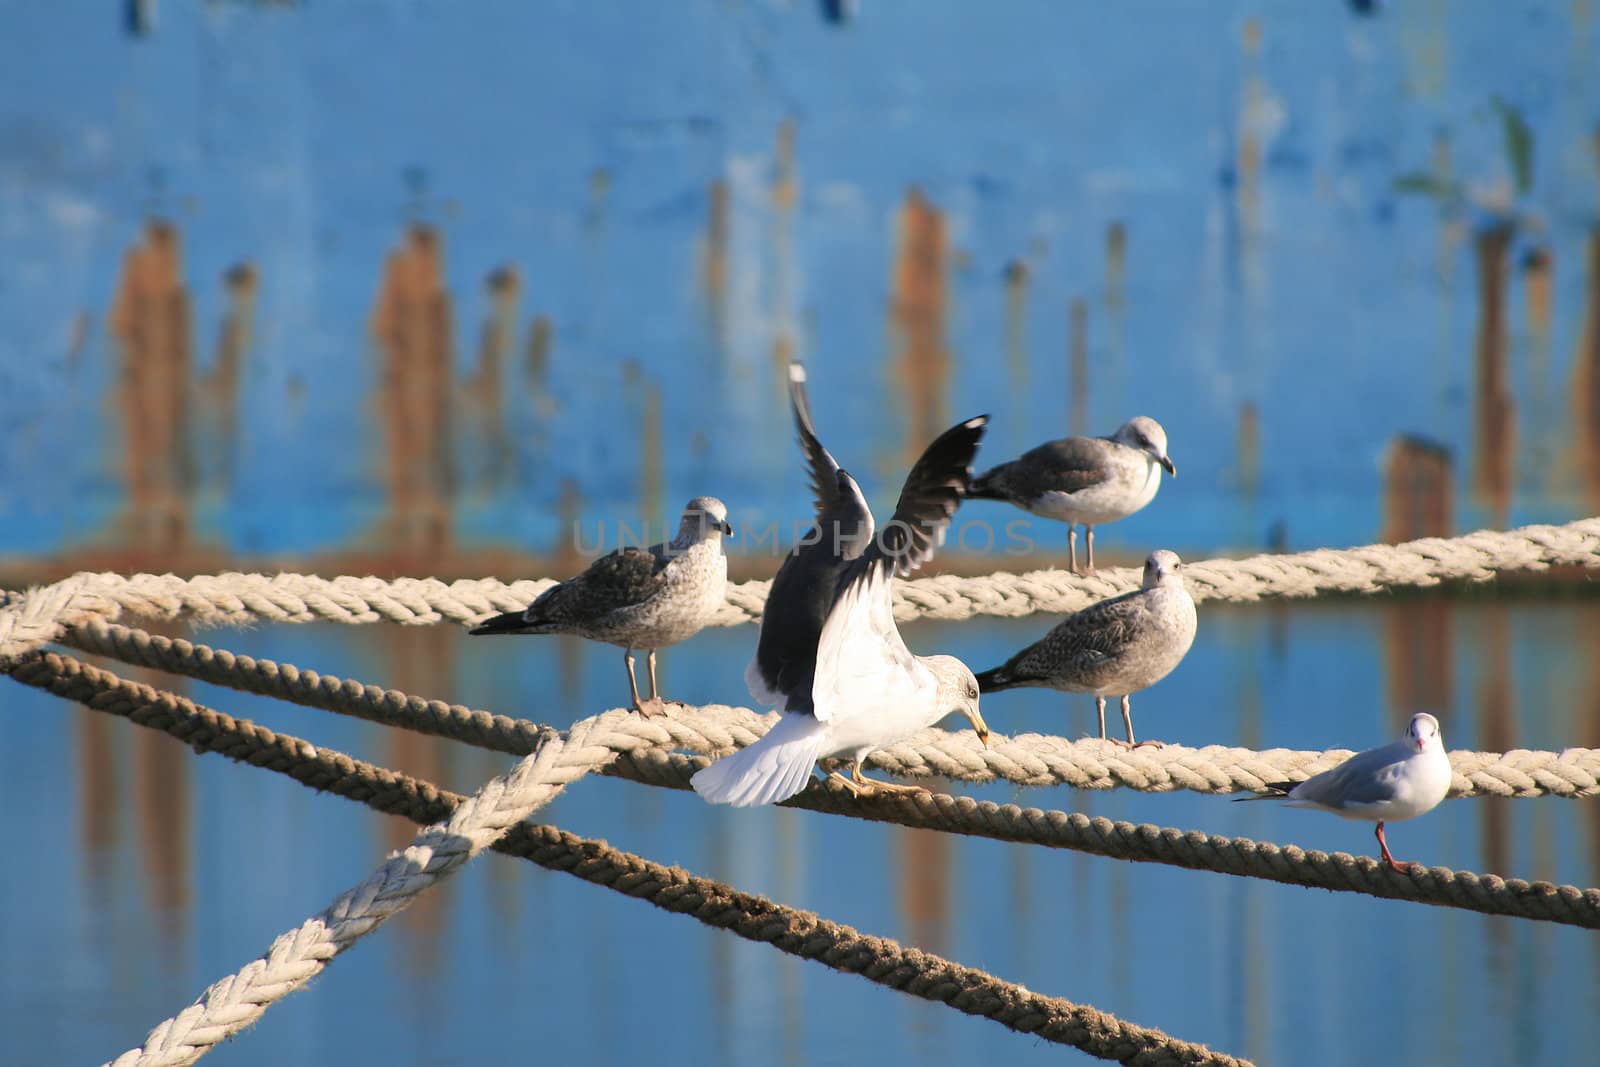 Seagulls in the rope by PauloResende